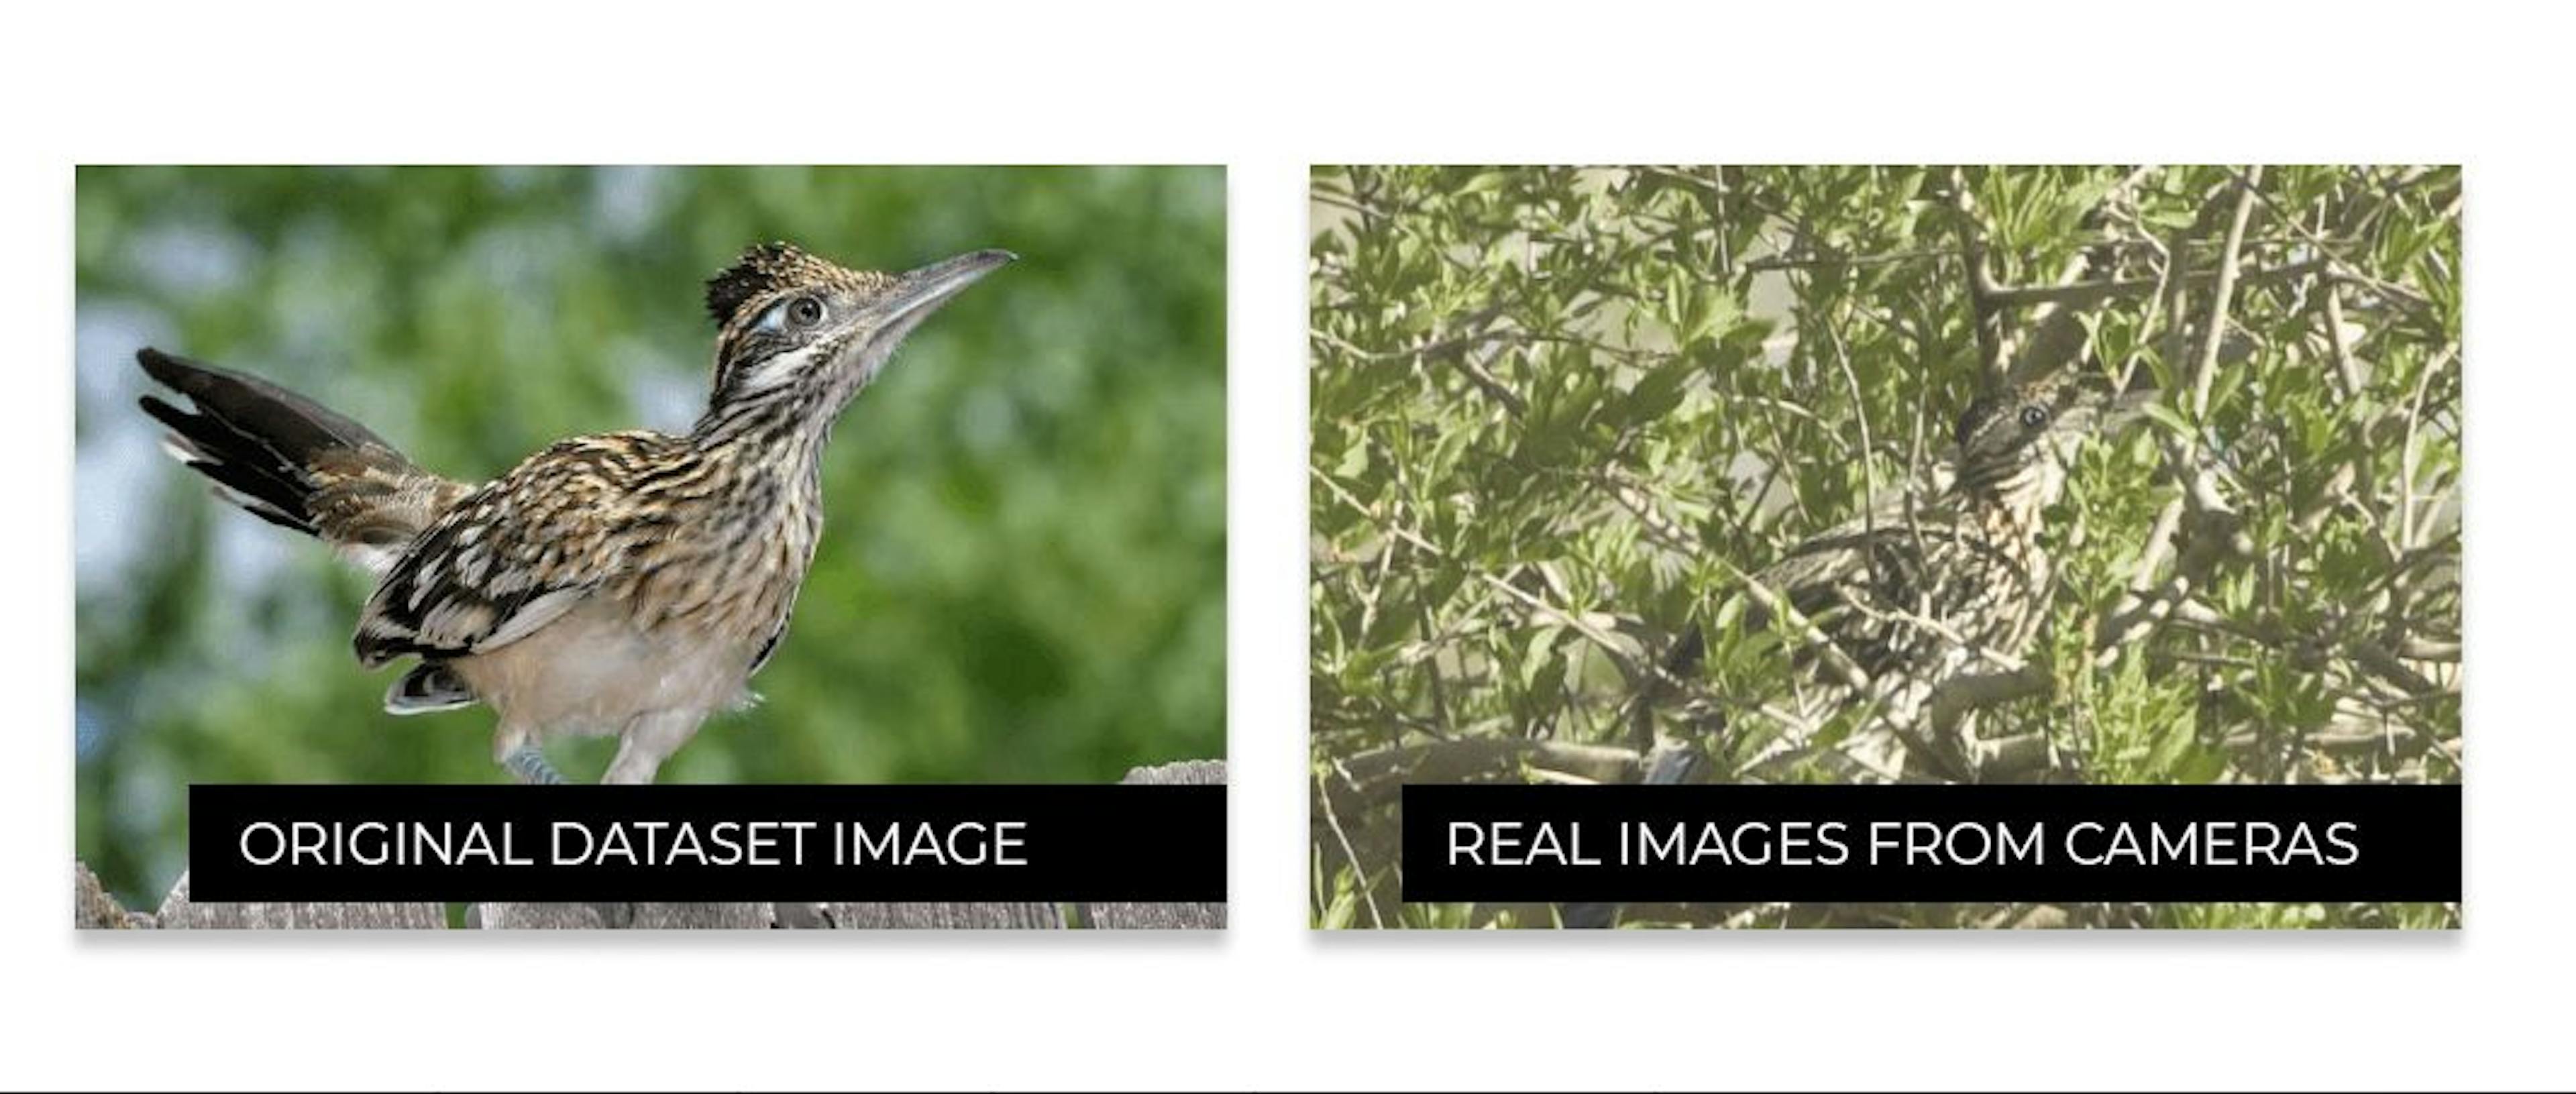 The difference between how birds look on the internet and how they look in real life setting